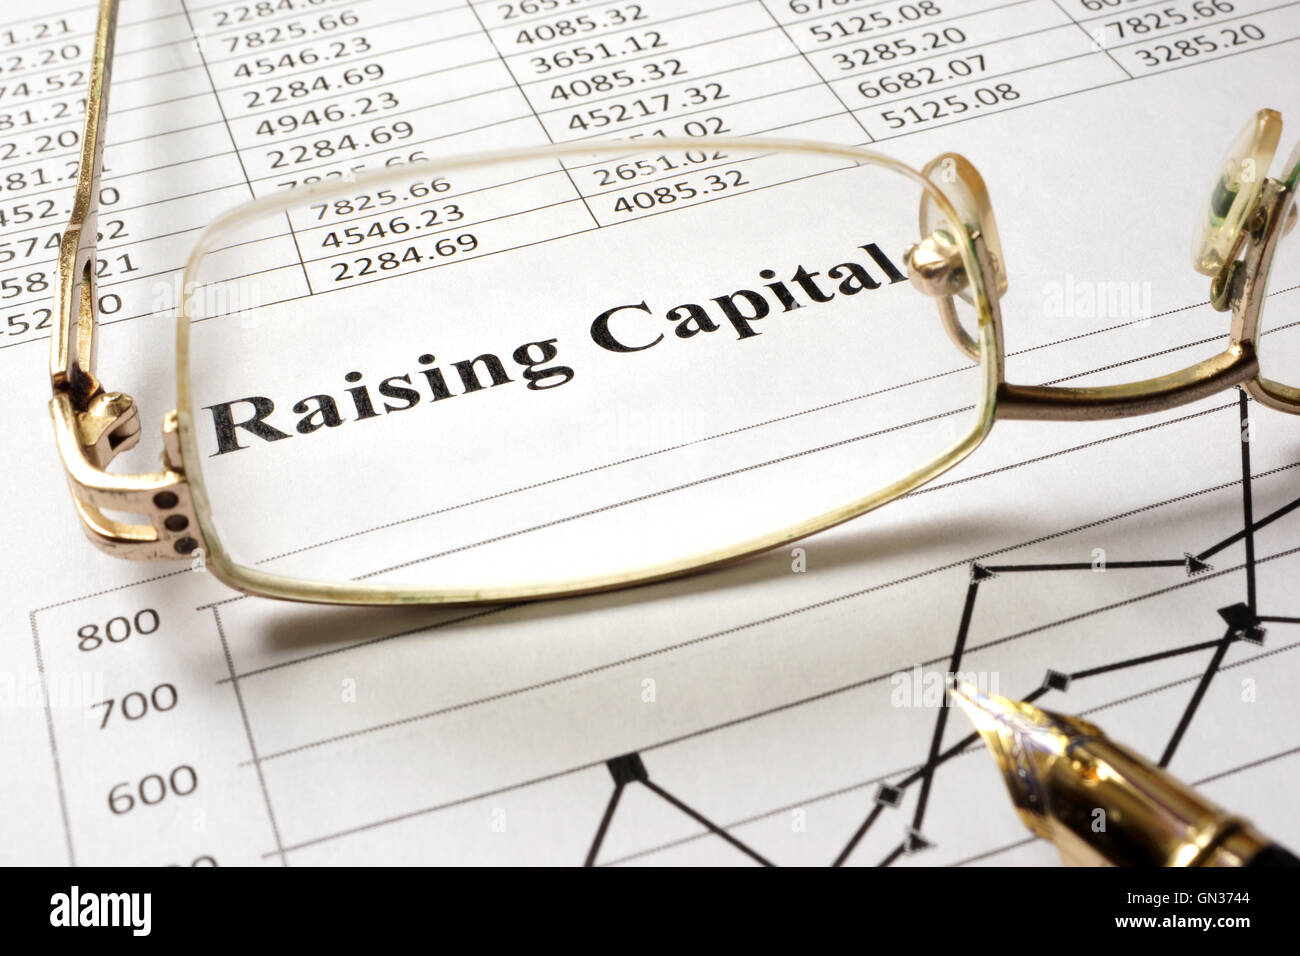 Sign raising capital on a paper and glasses. Stock Photo